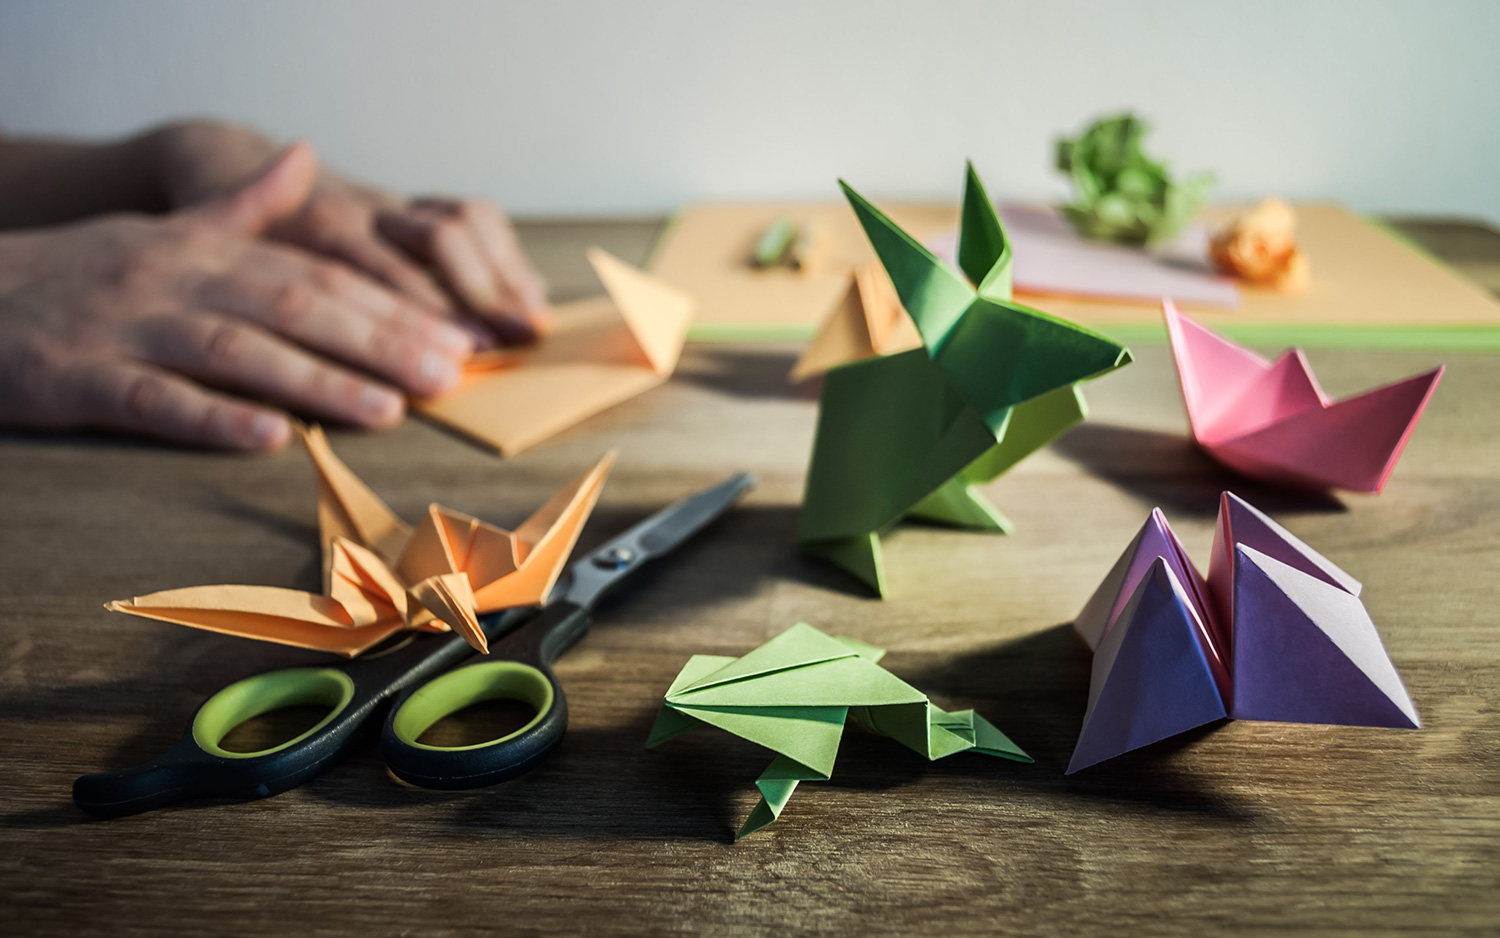 What is Origami and its Origin?